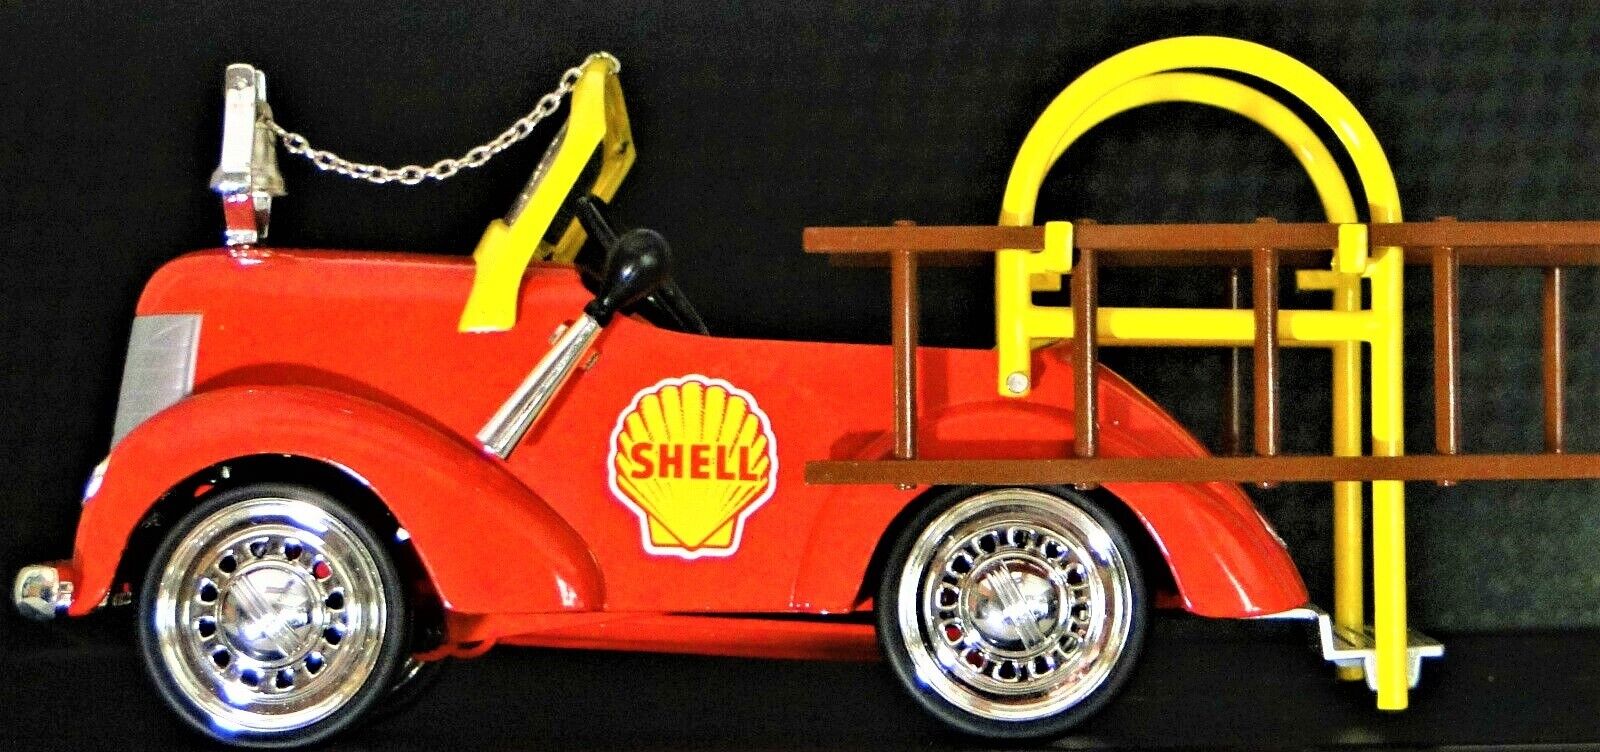 Ford Shell Oil Gas Collector Fire Engine Pickup Truck MINI Pedal Car Metal Toy